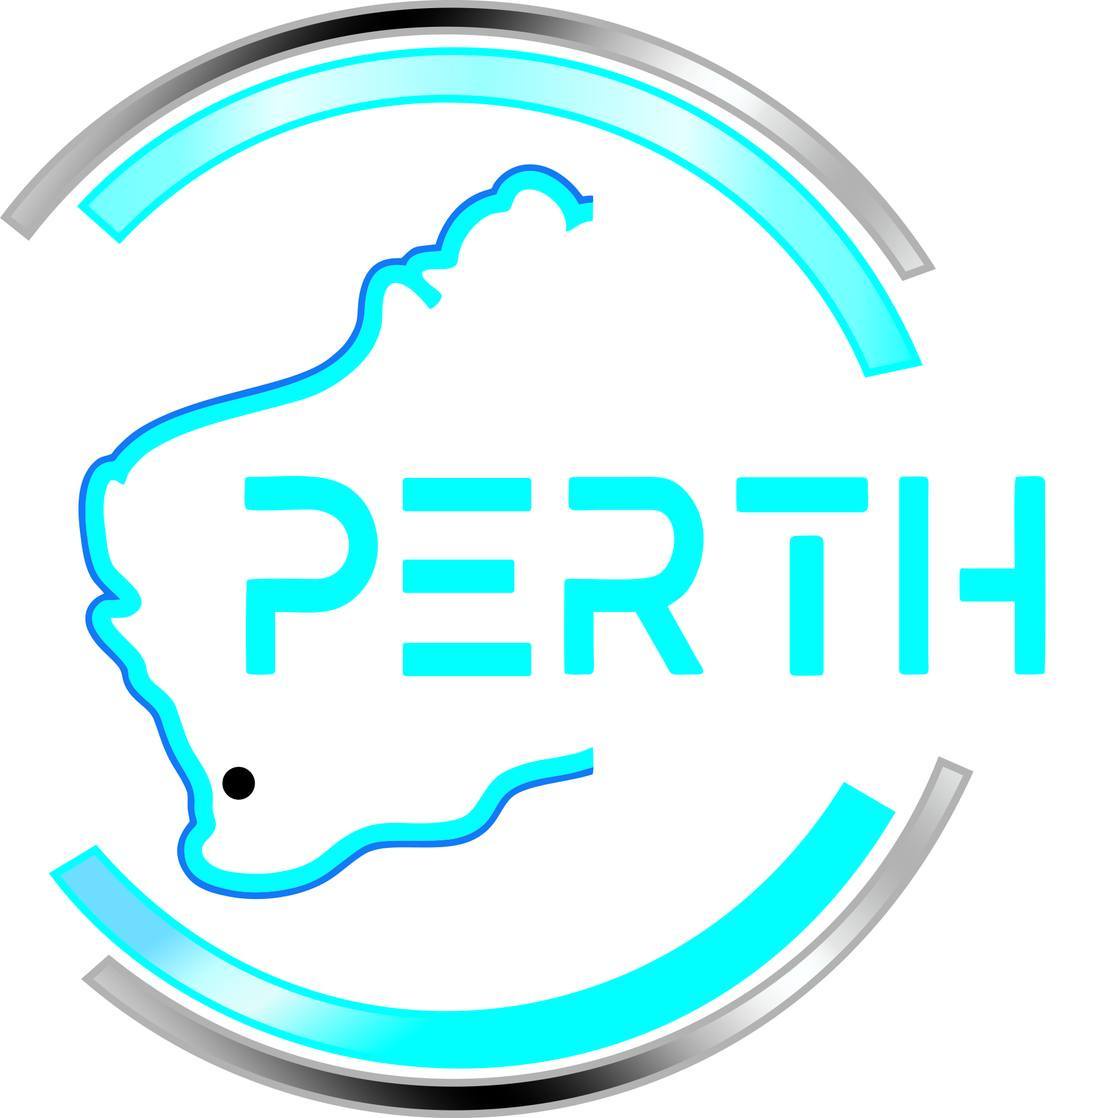 How Is It Possible To Find A Gender Scan In Perth?